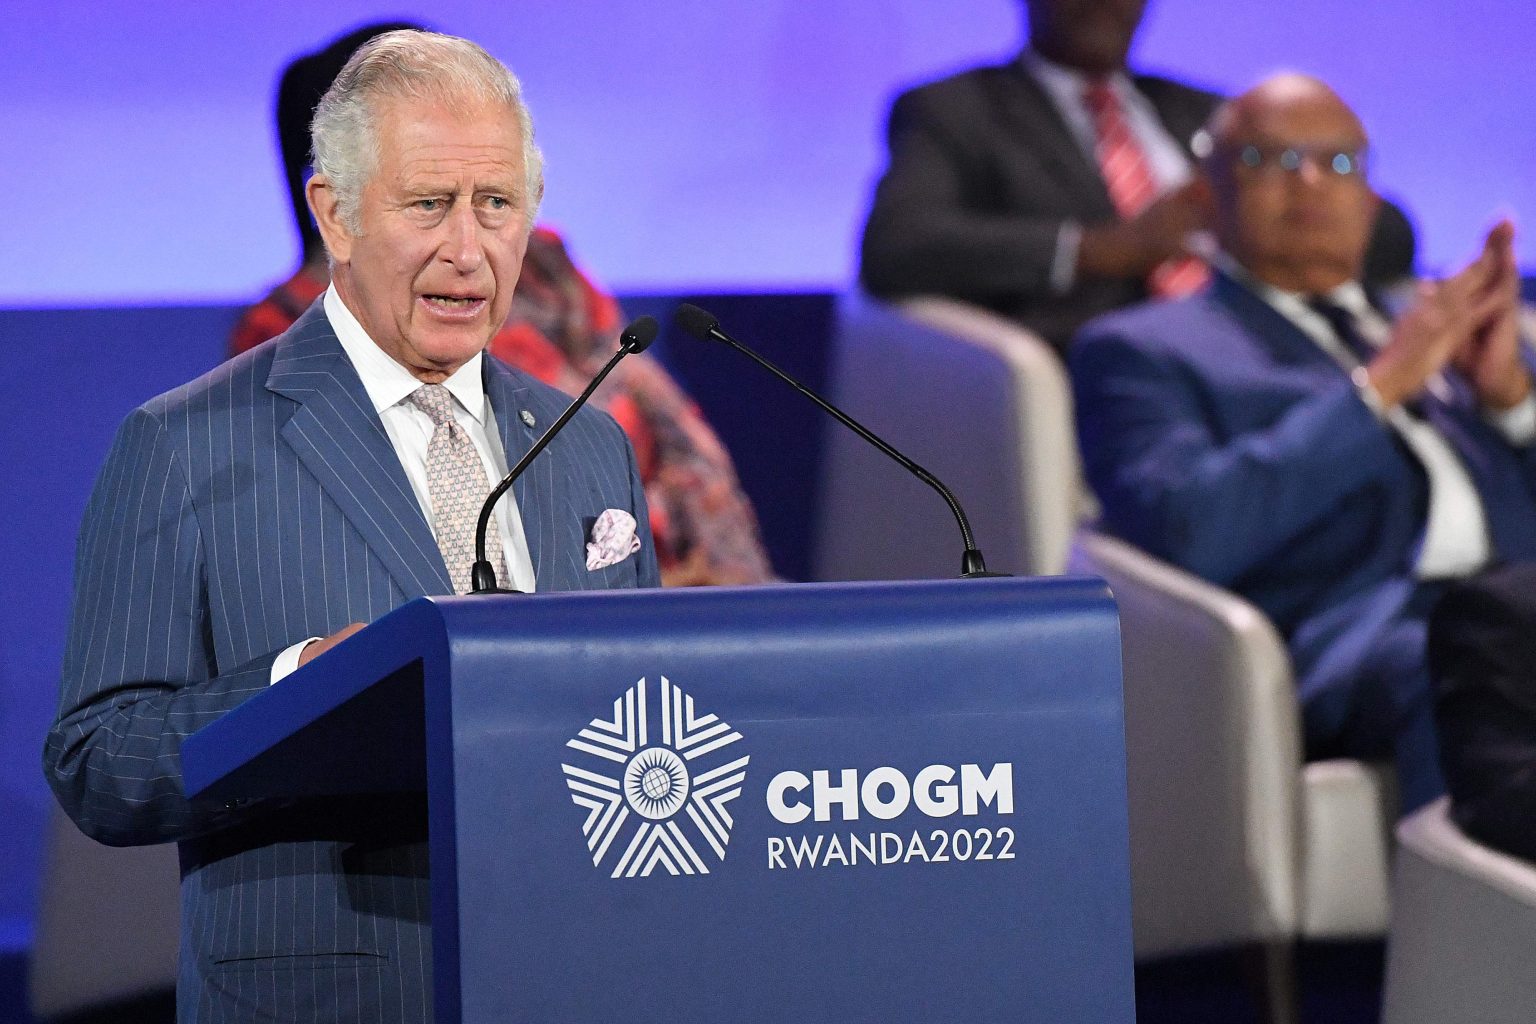 The Commonwealth Heads of Government Meeting (CHOGM), which brought leaders from 56 independent and equal countries to Kigali in June, was a significant step forward. www.theexchange.africa